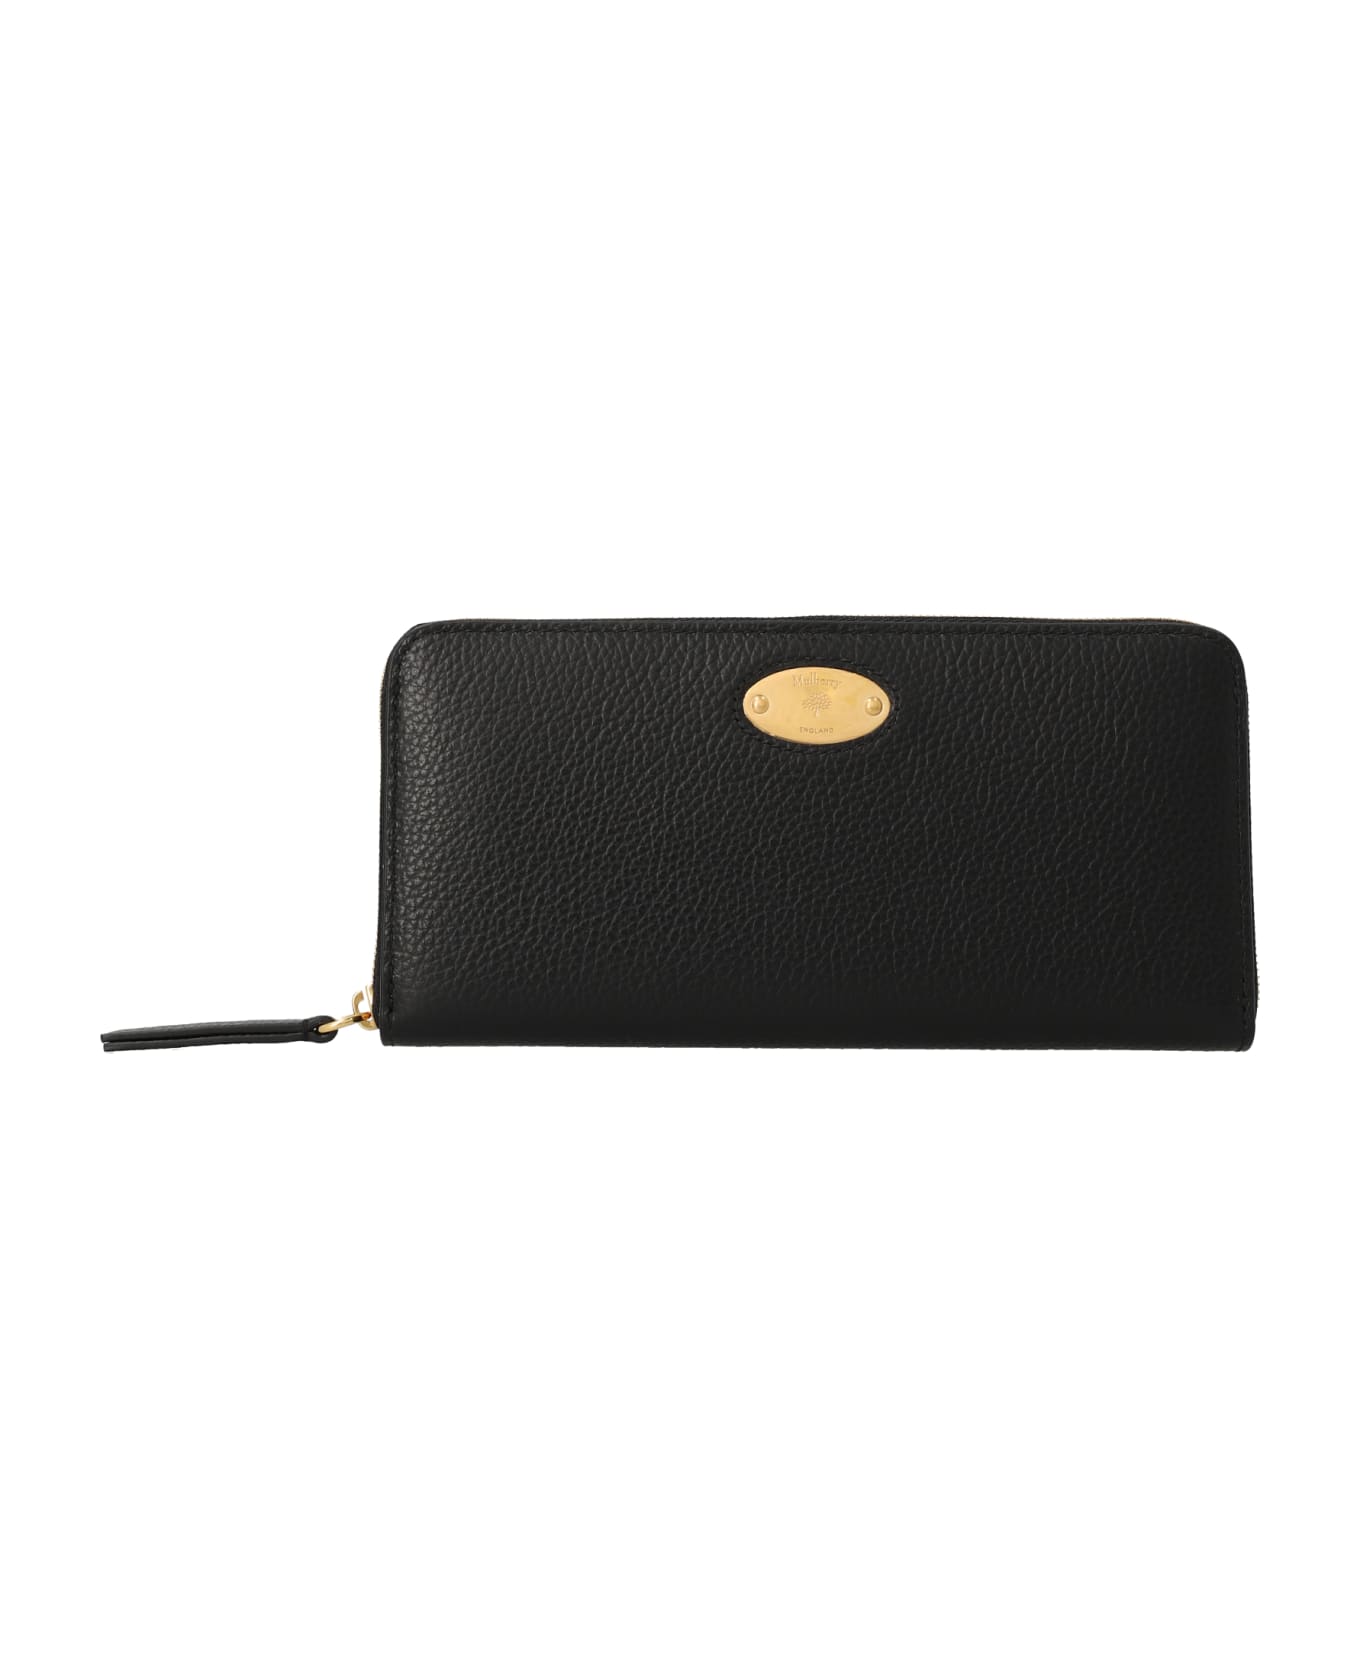 Mulberry 'mulberry Plaque' Wallet - Black  